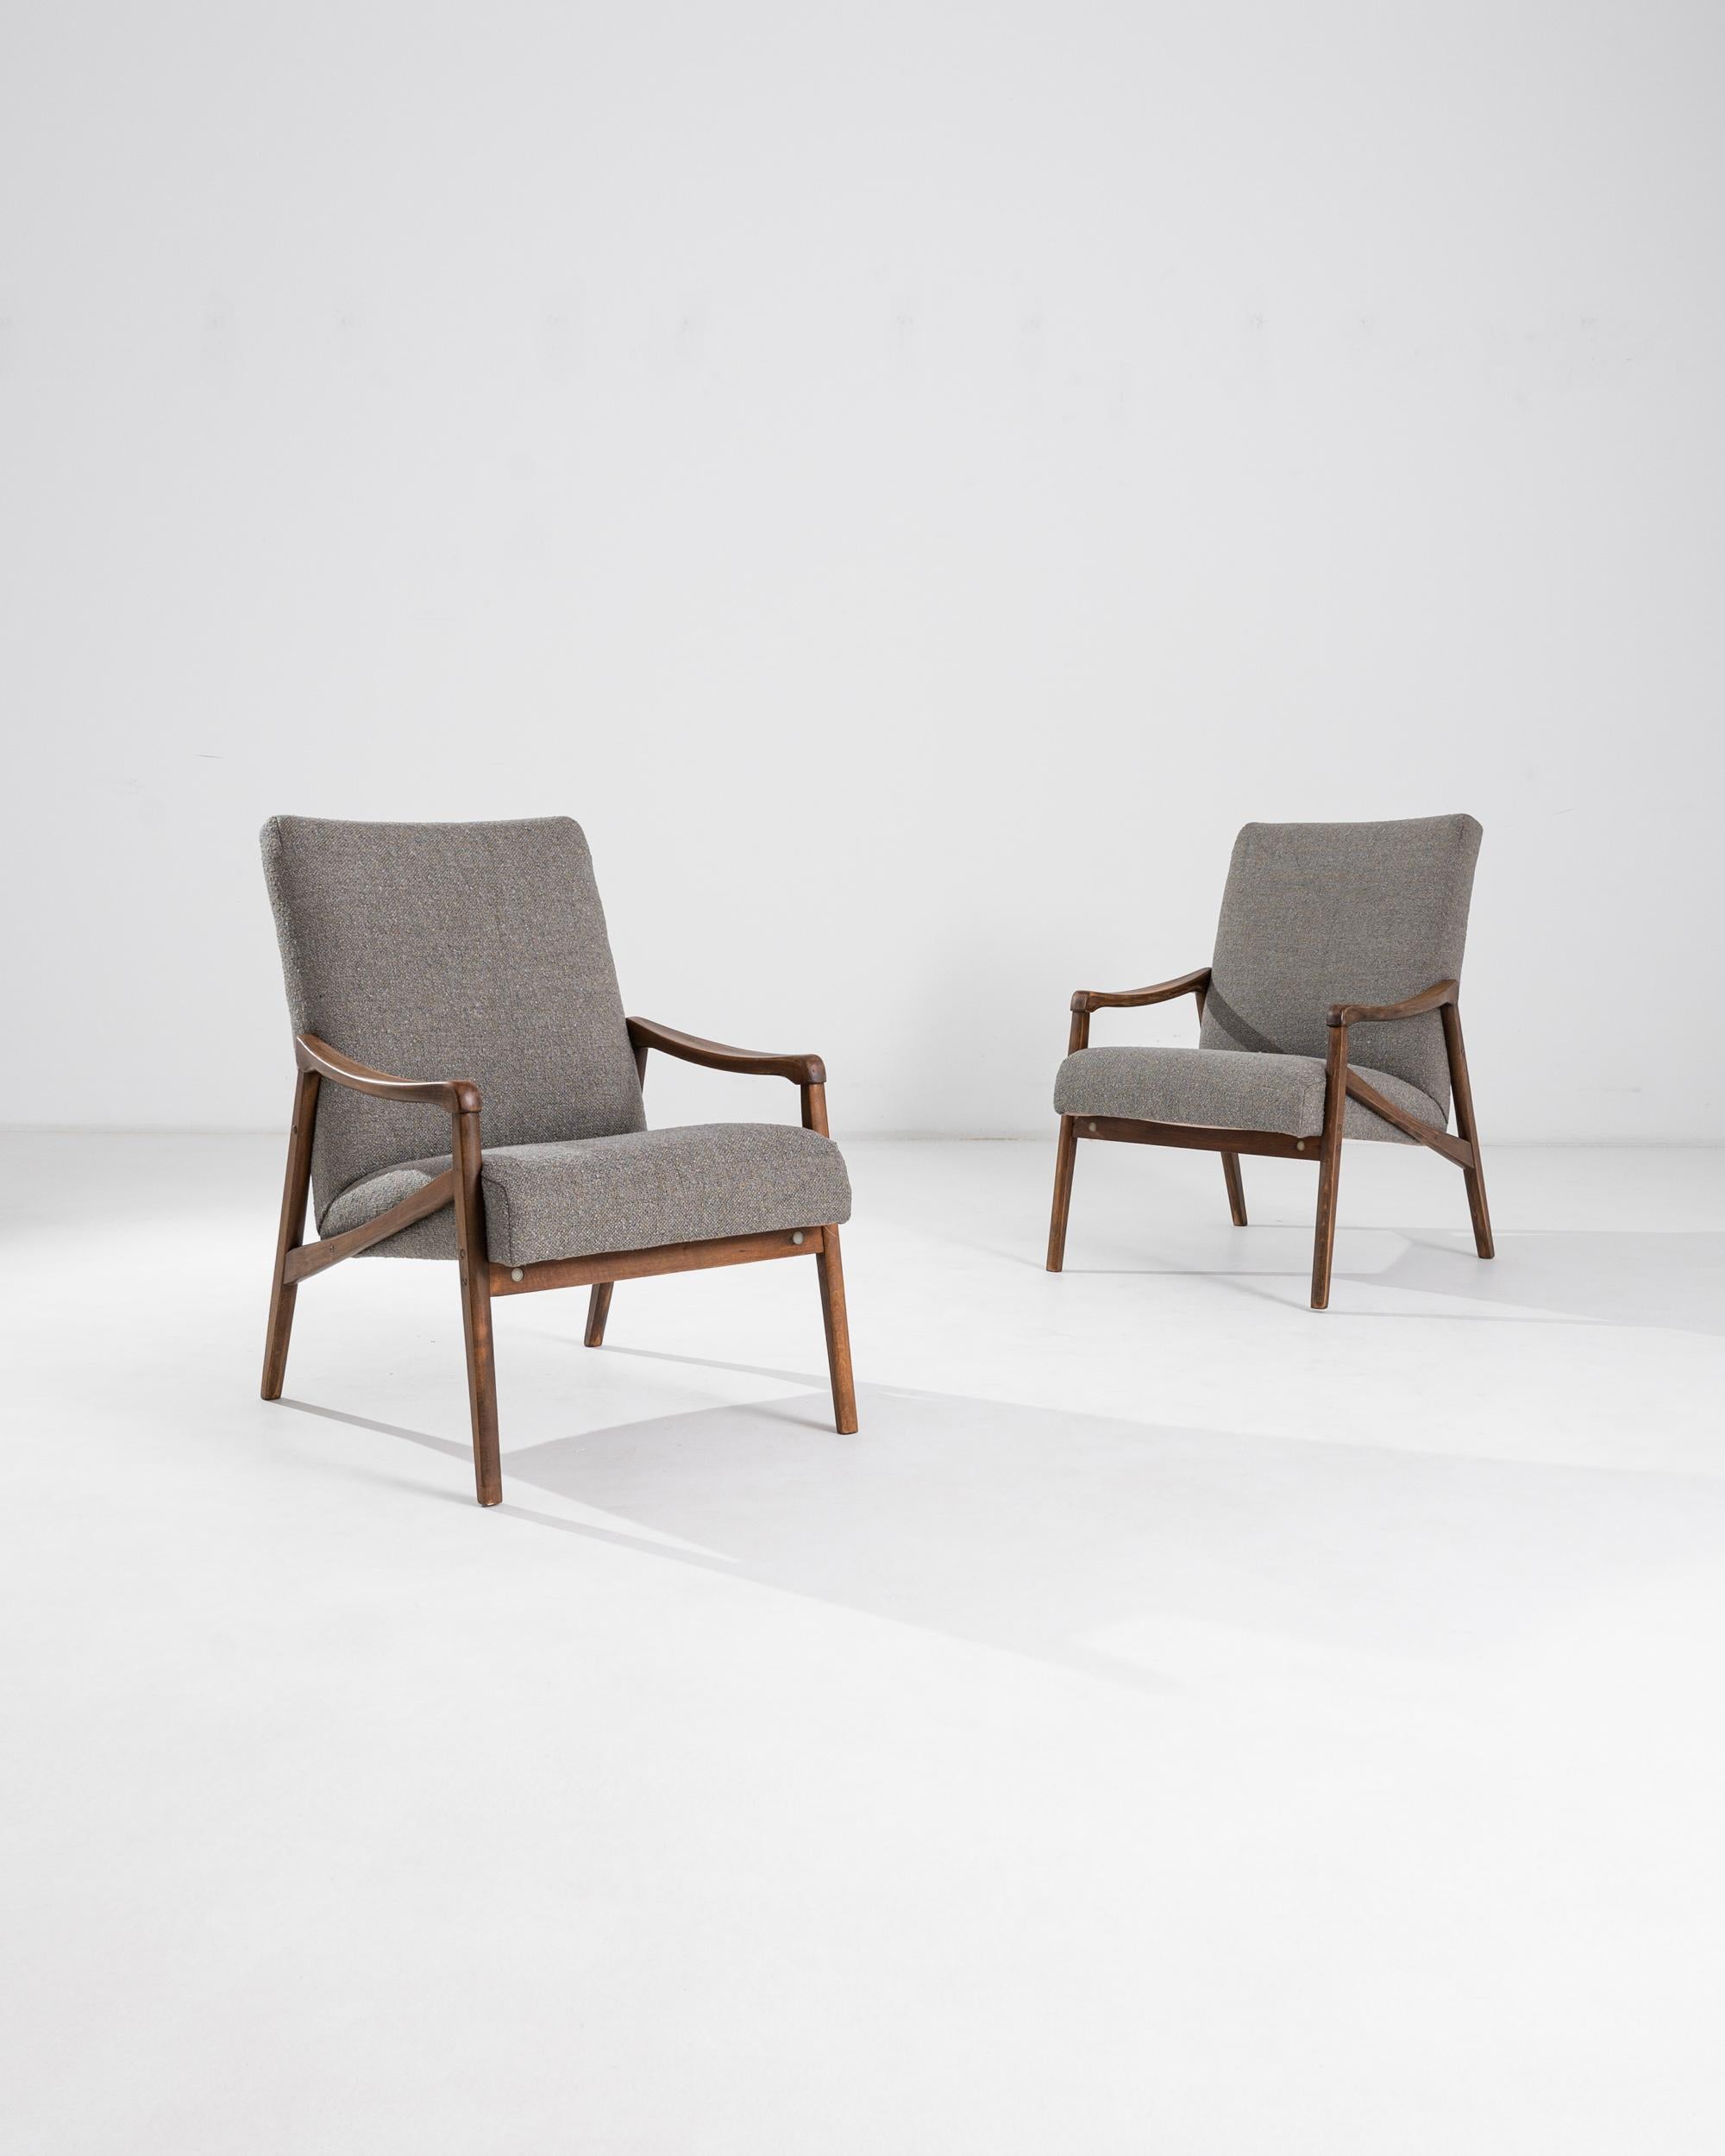 A pair of armchairs produced in the former Czechoslovakia, with the design attributed to Jiri Jiroutek. This 1960s design is re-upholstered in an updated taupe boucle upholstery; the neutral tone was chosen to compliment the polished patina of the